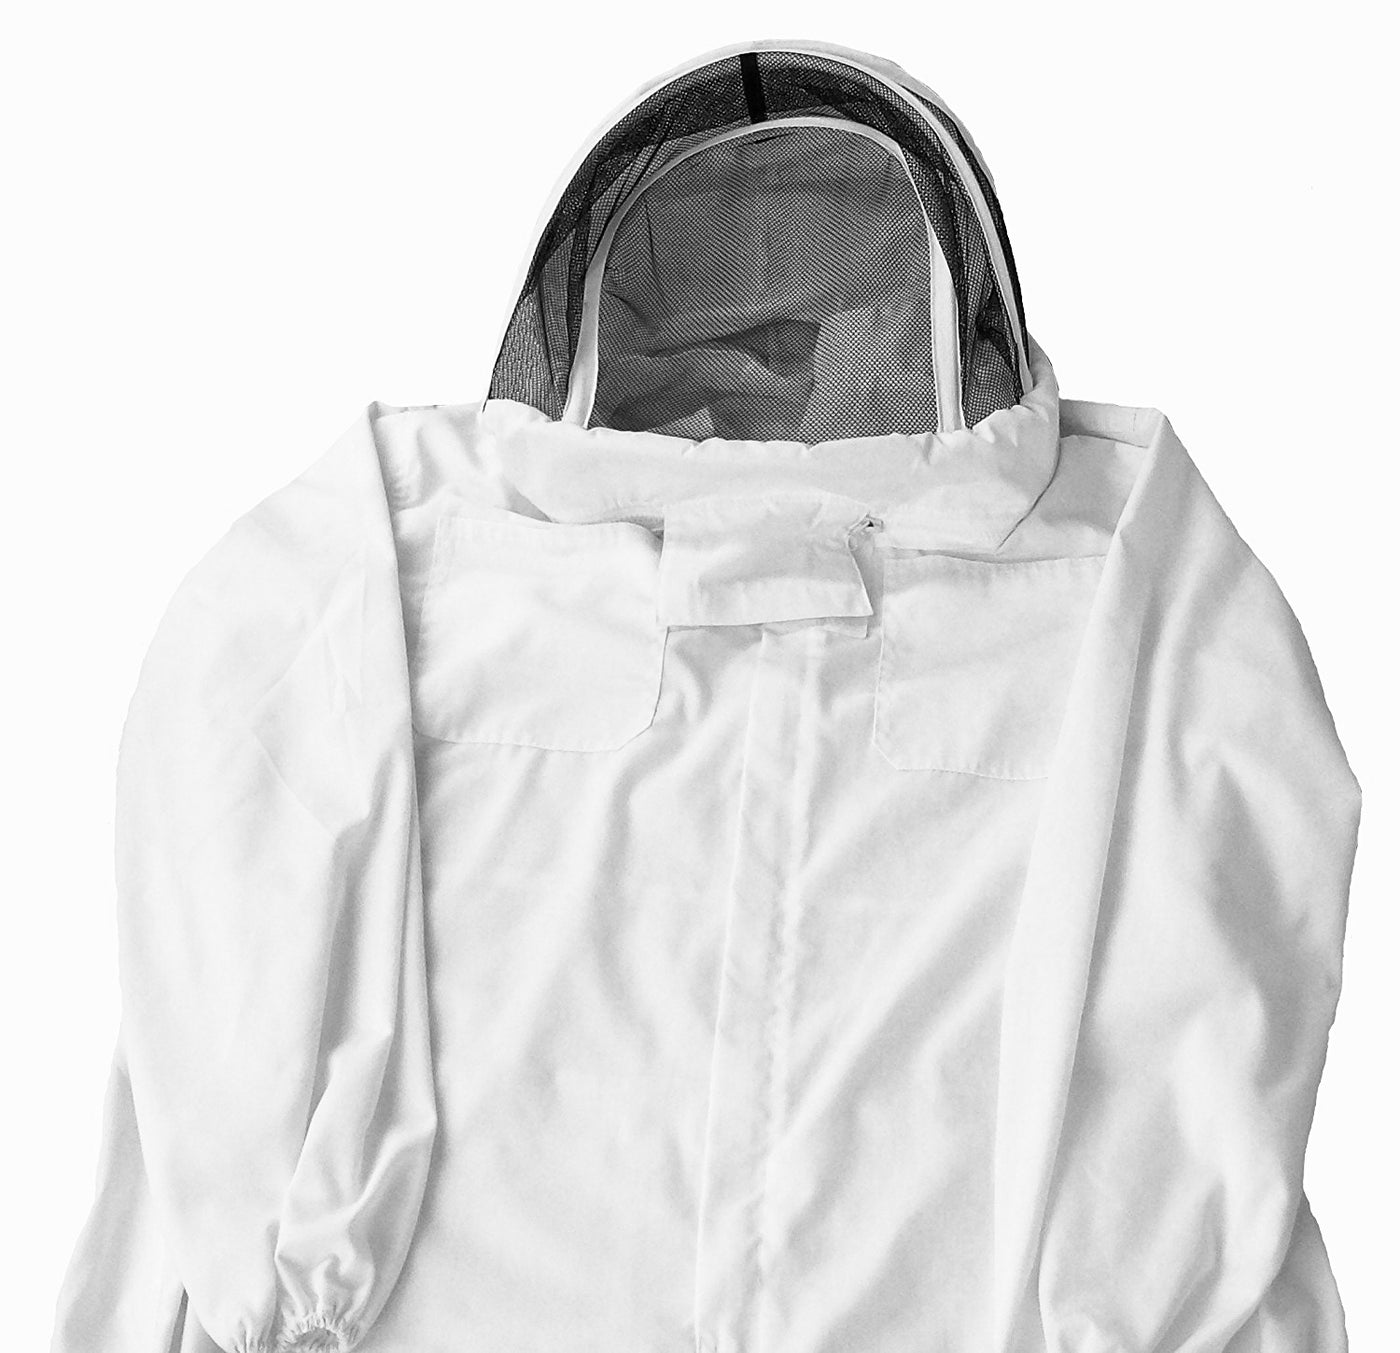 Extra Large Full Body Beekeeping Suit